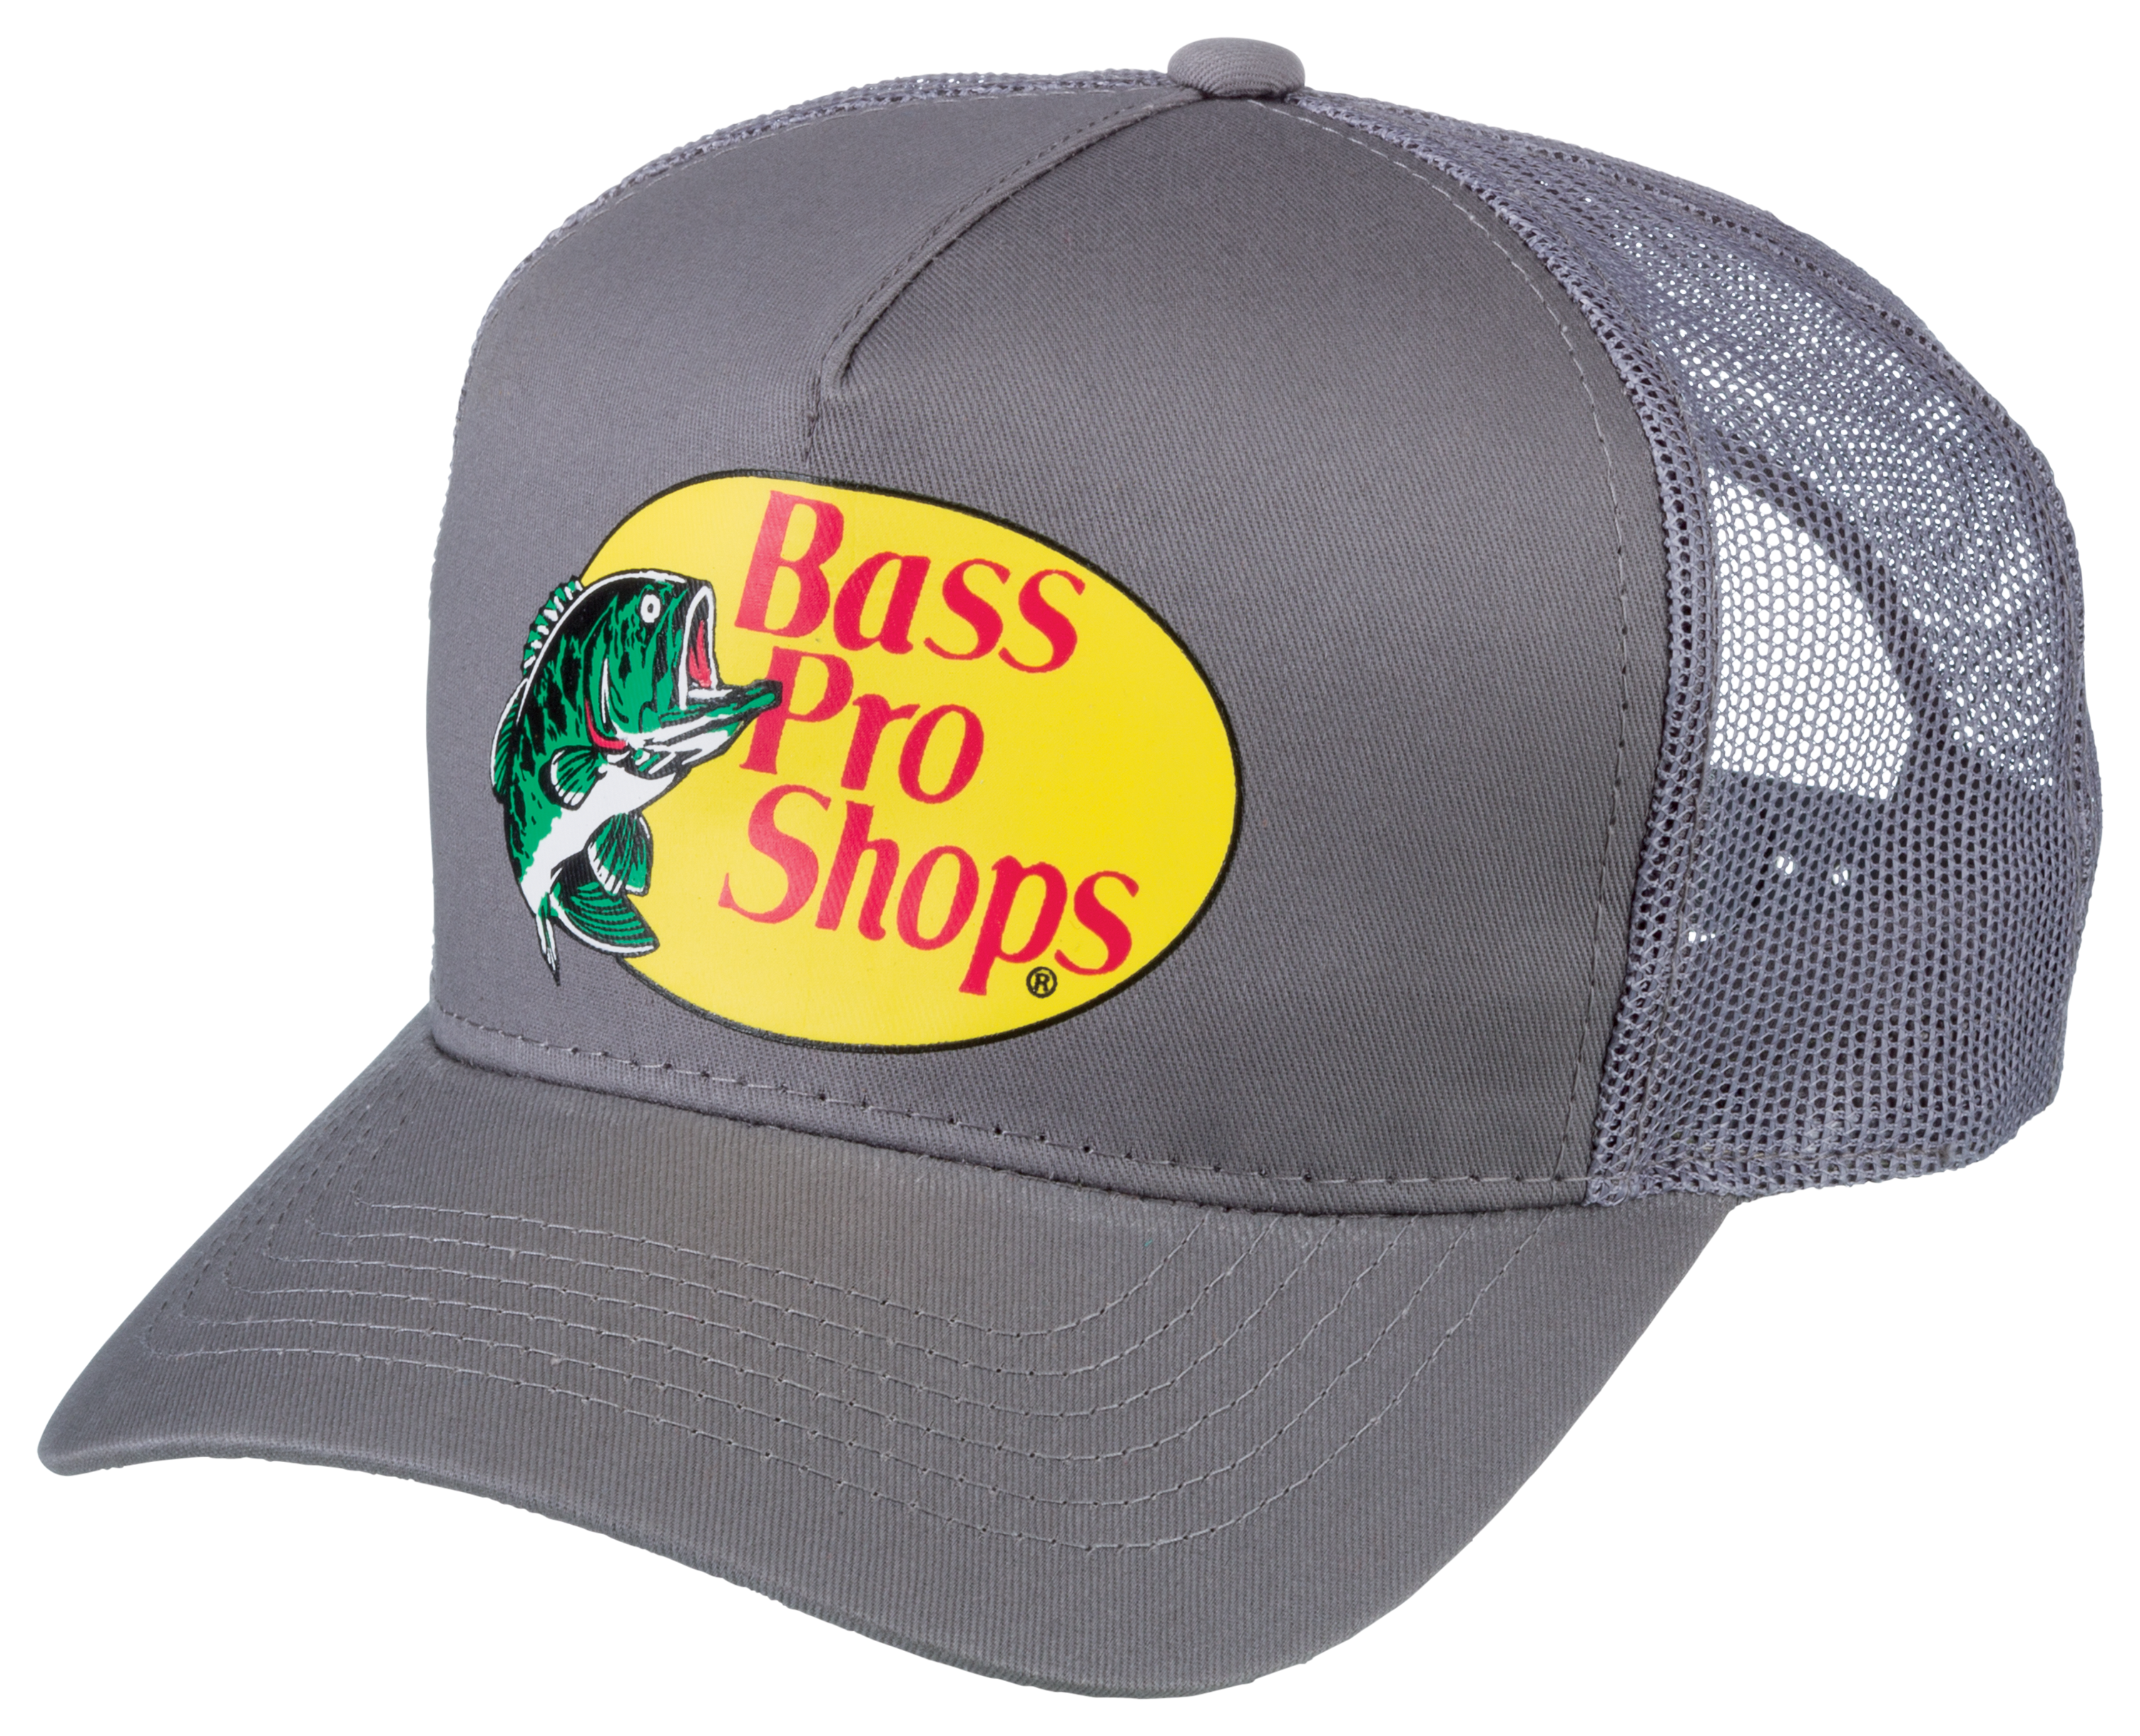 Bass-pro-Shops Trucker hat mesh Cap Mountaineering Great for Hunting Travel Fishing one Size fits All Snapback Closure 